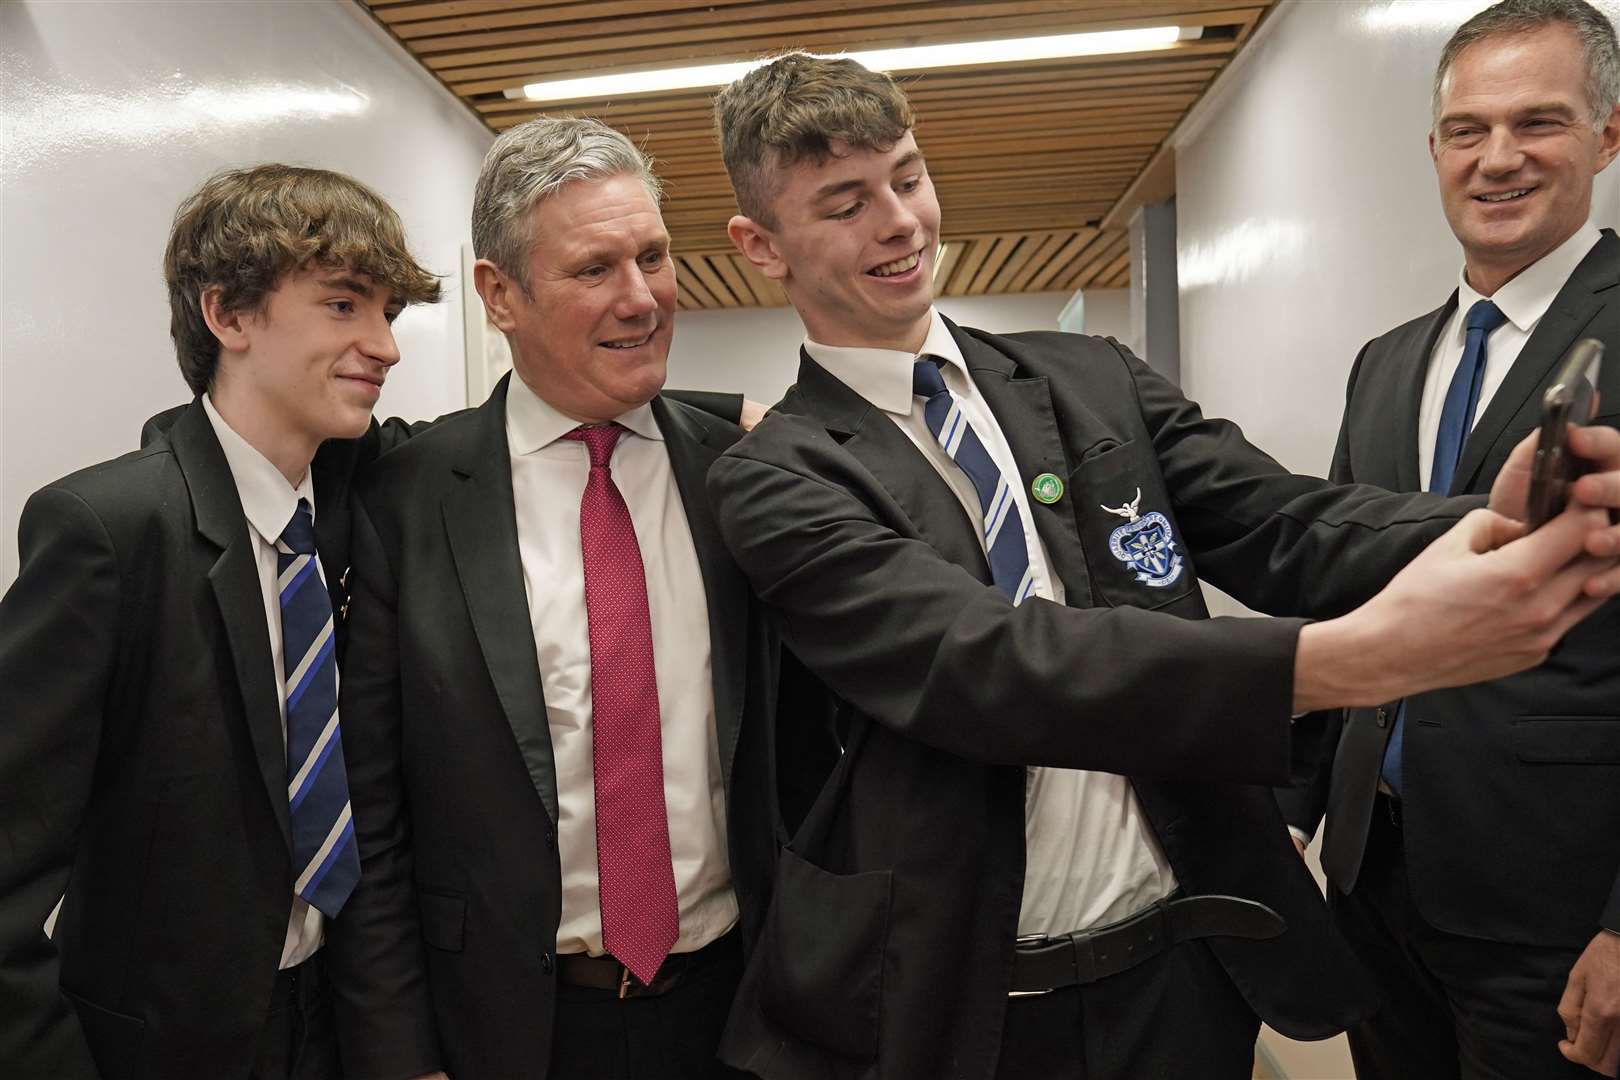 Labour leader Sir Keir Starmer poses for a picture with students during a visit to St Columb’s College in Derry, Northern Ireland (Brian Lawless/PA)